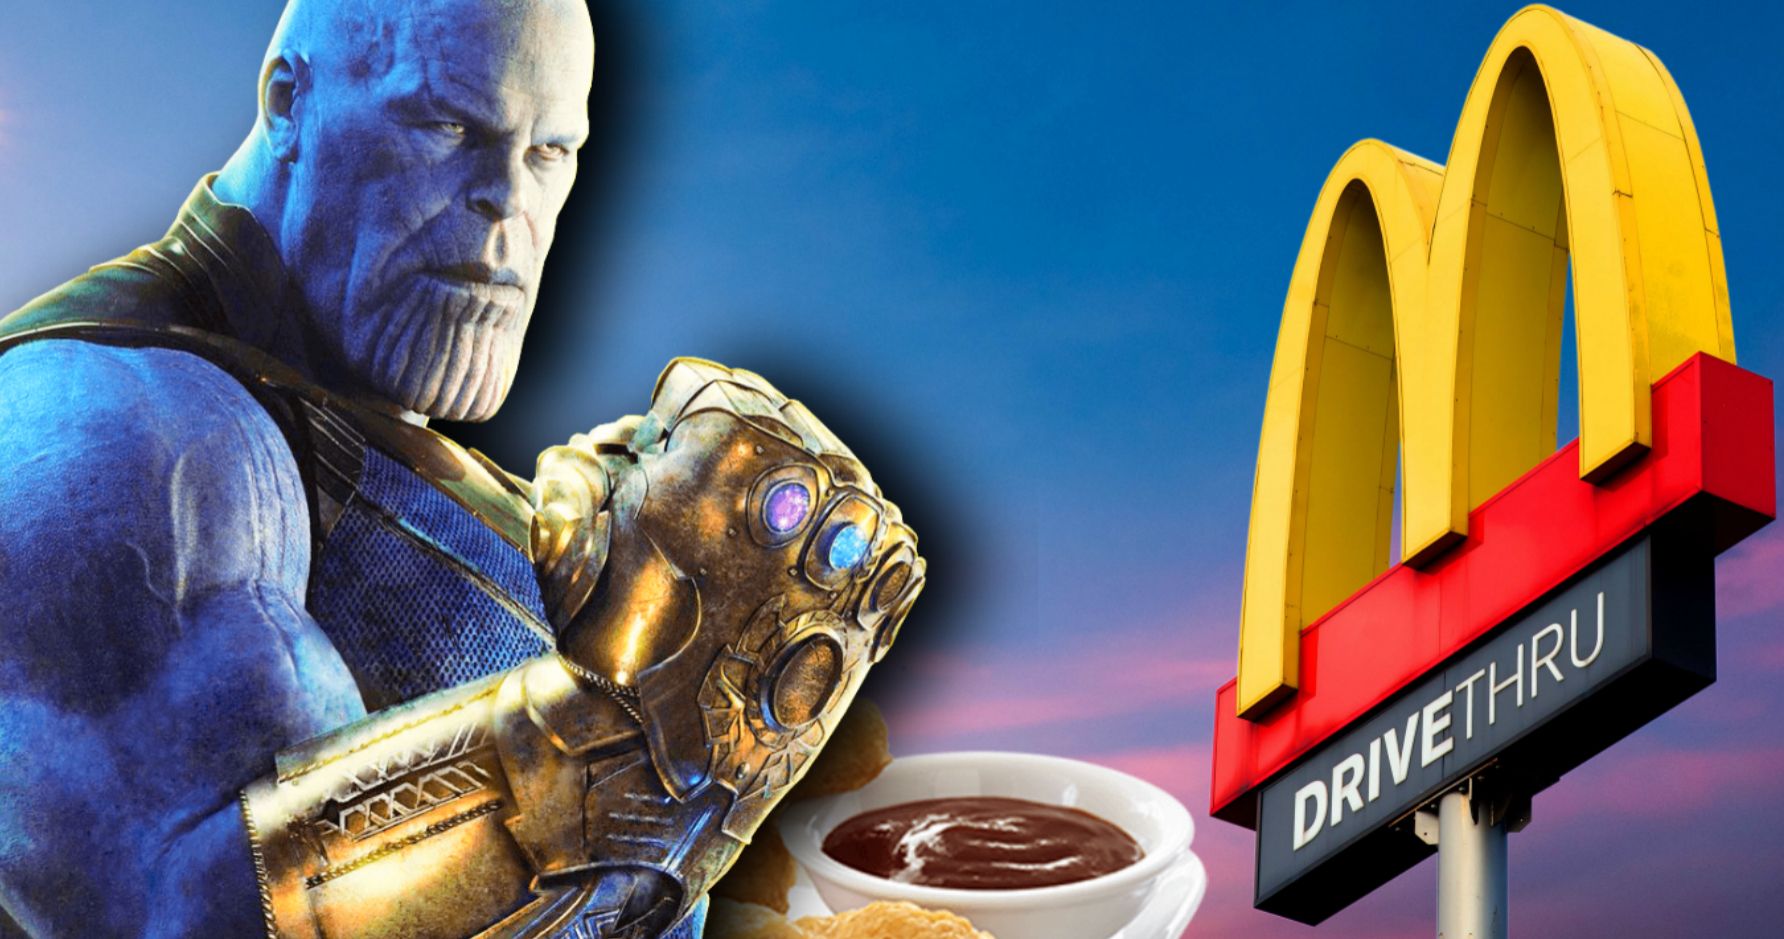 The Infinity Saucelet: Man Builds Infinity Gauntlet from McDonald's Dipping Sauces